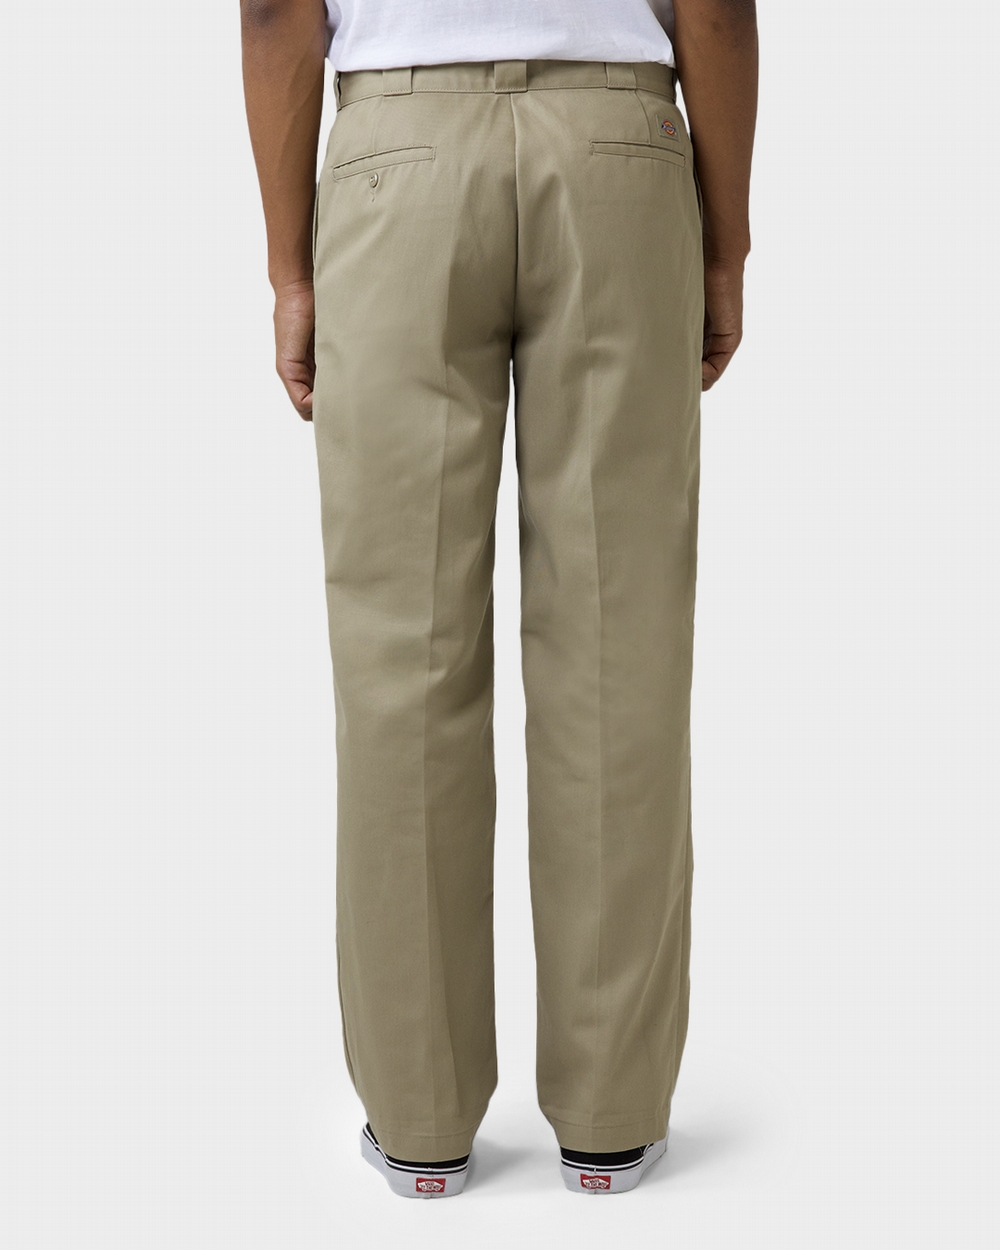 Industrial Pants and Work Pants | Lazzar Uniforms